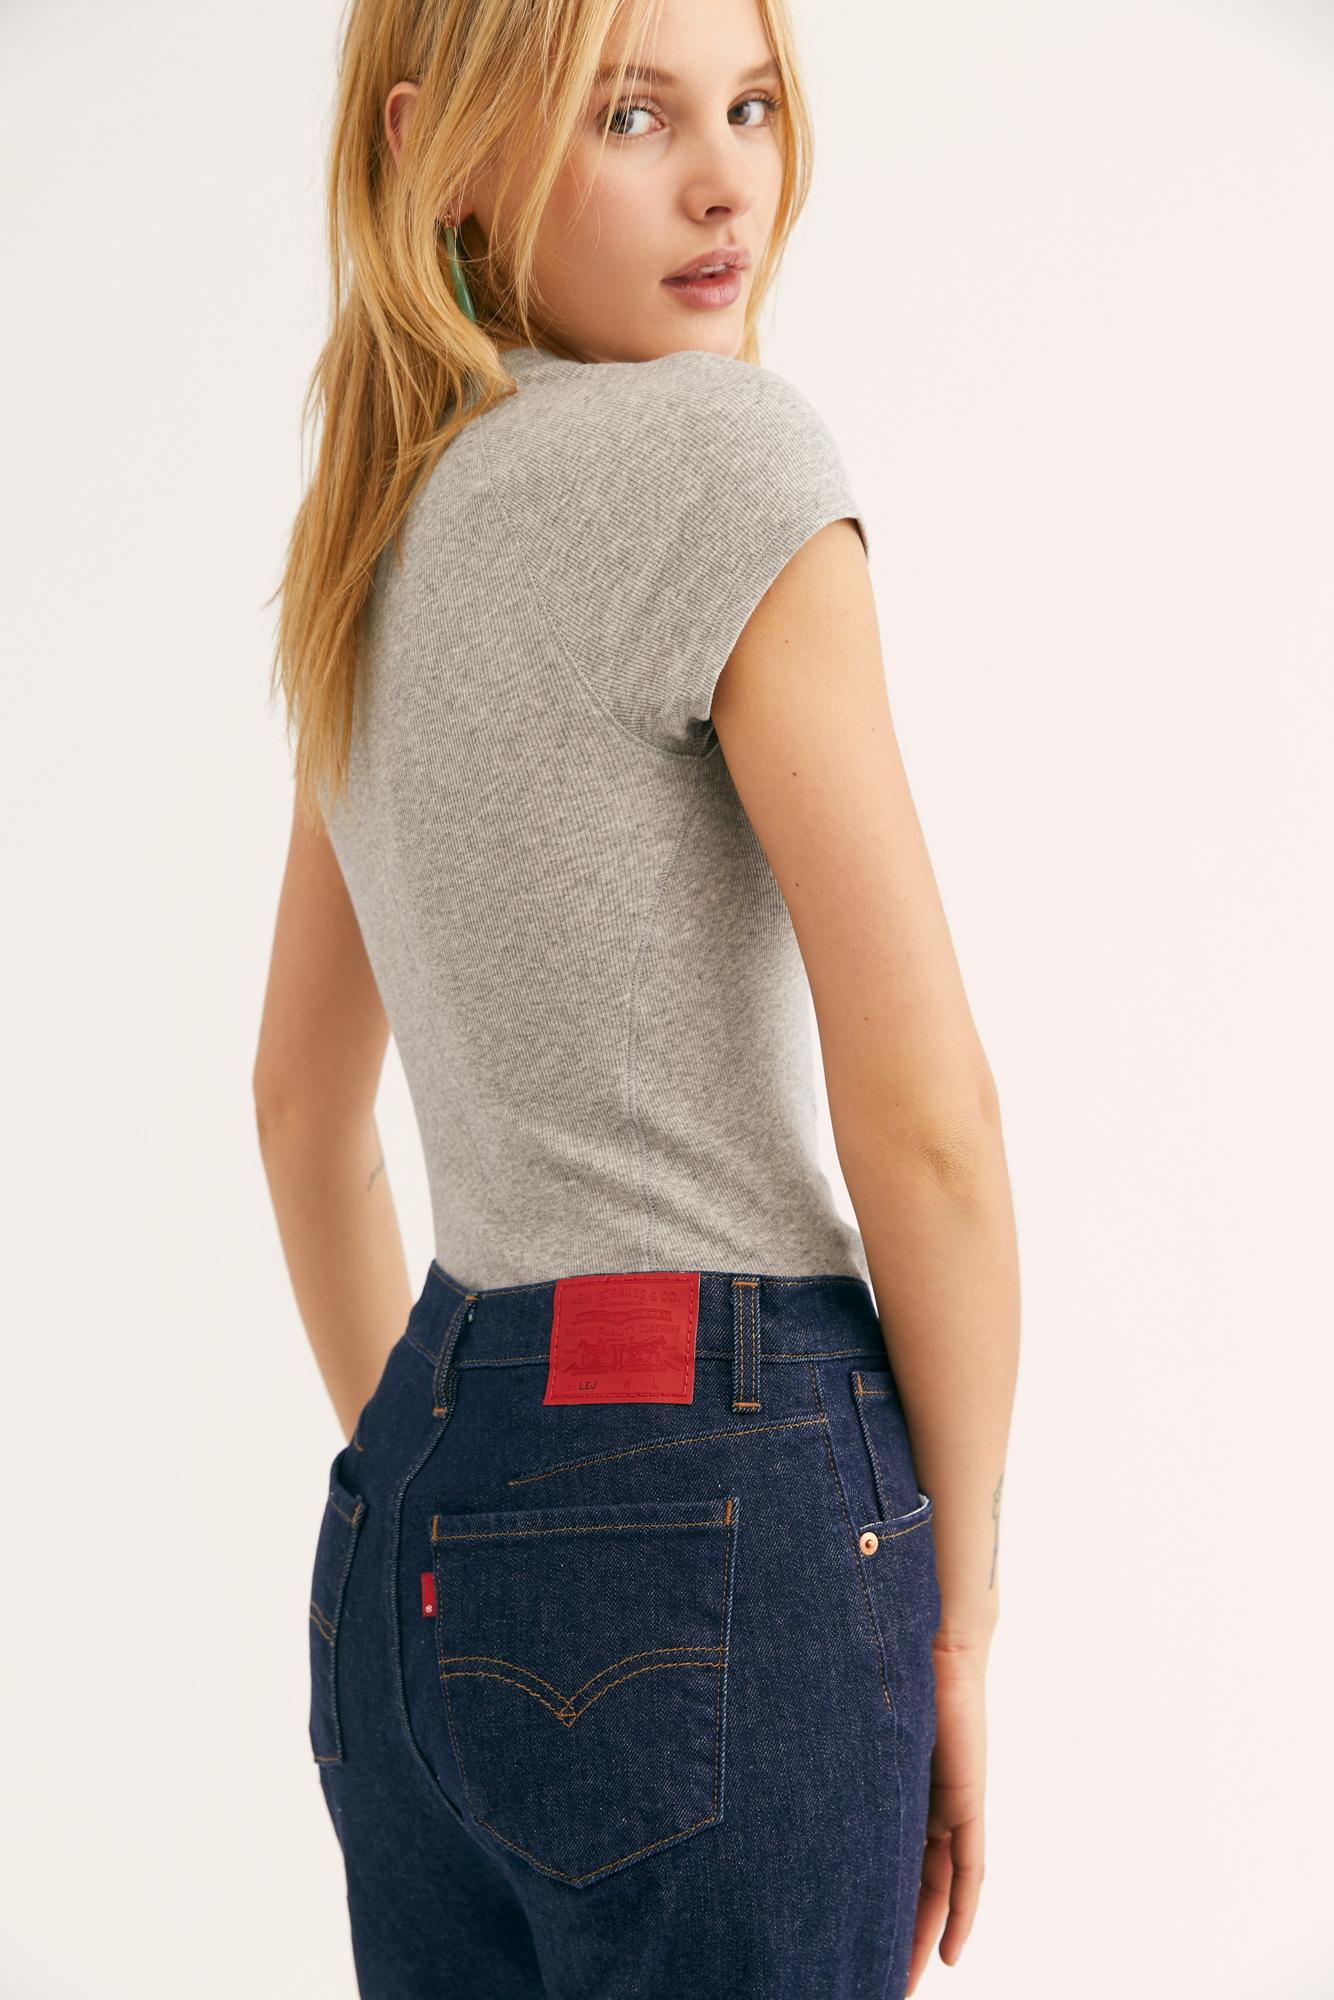 levi's slouchy taper